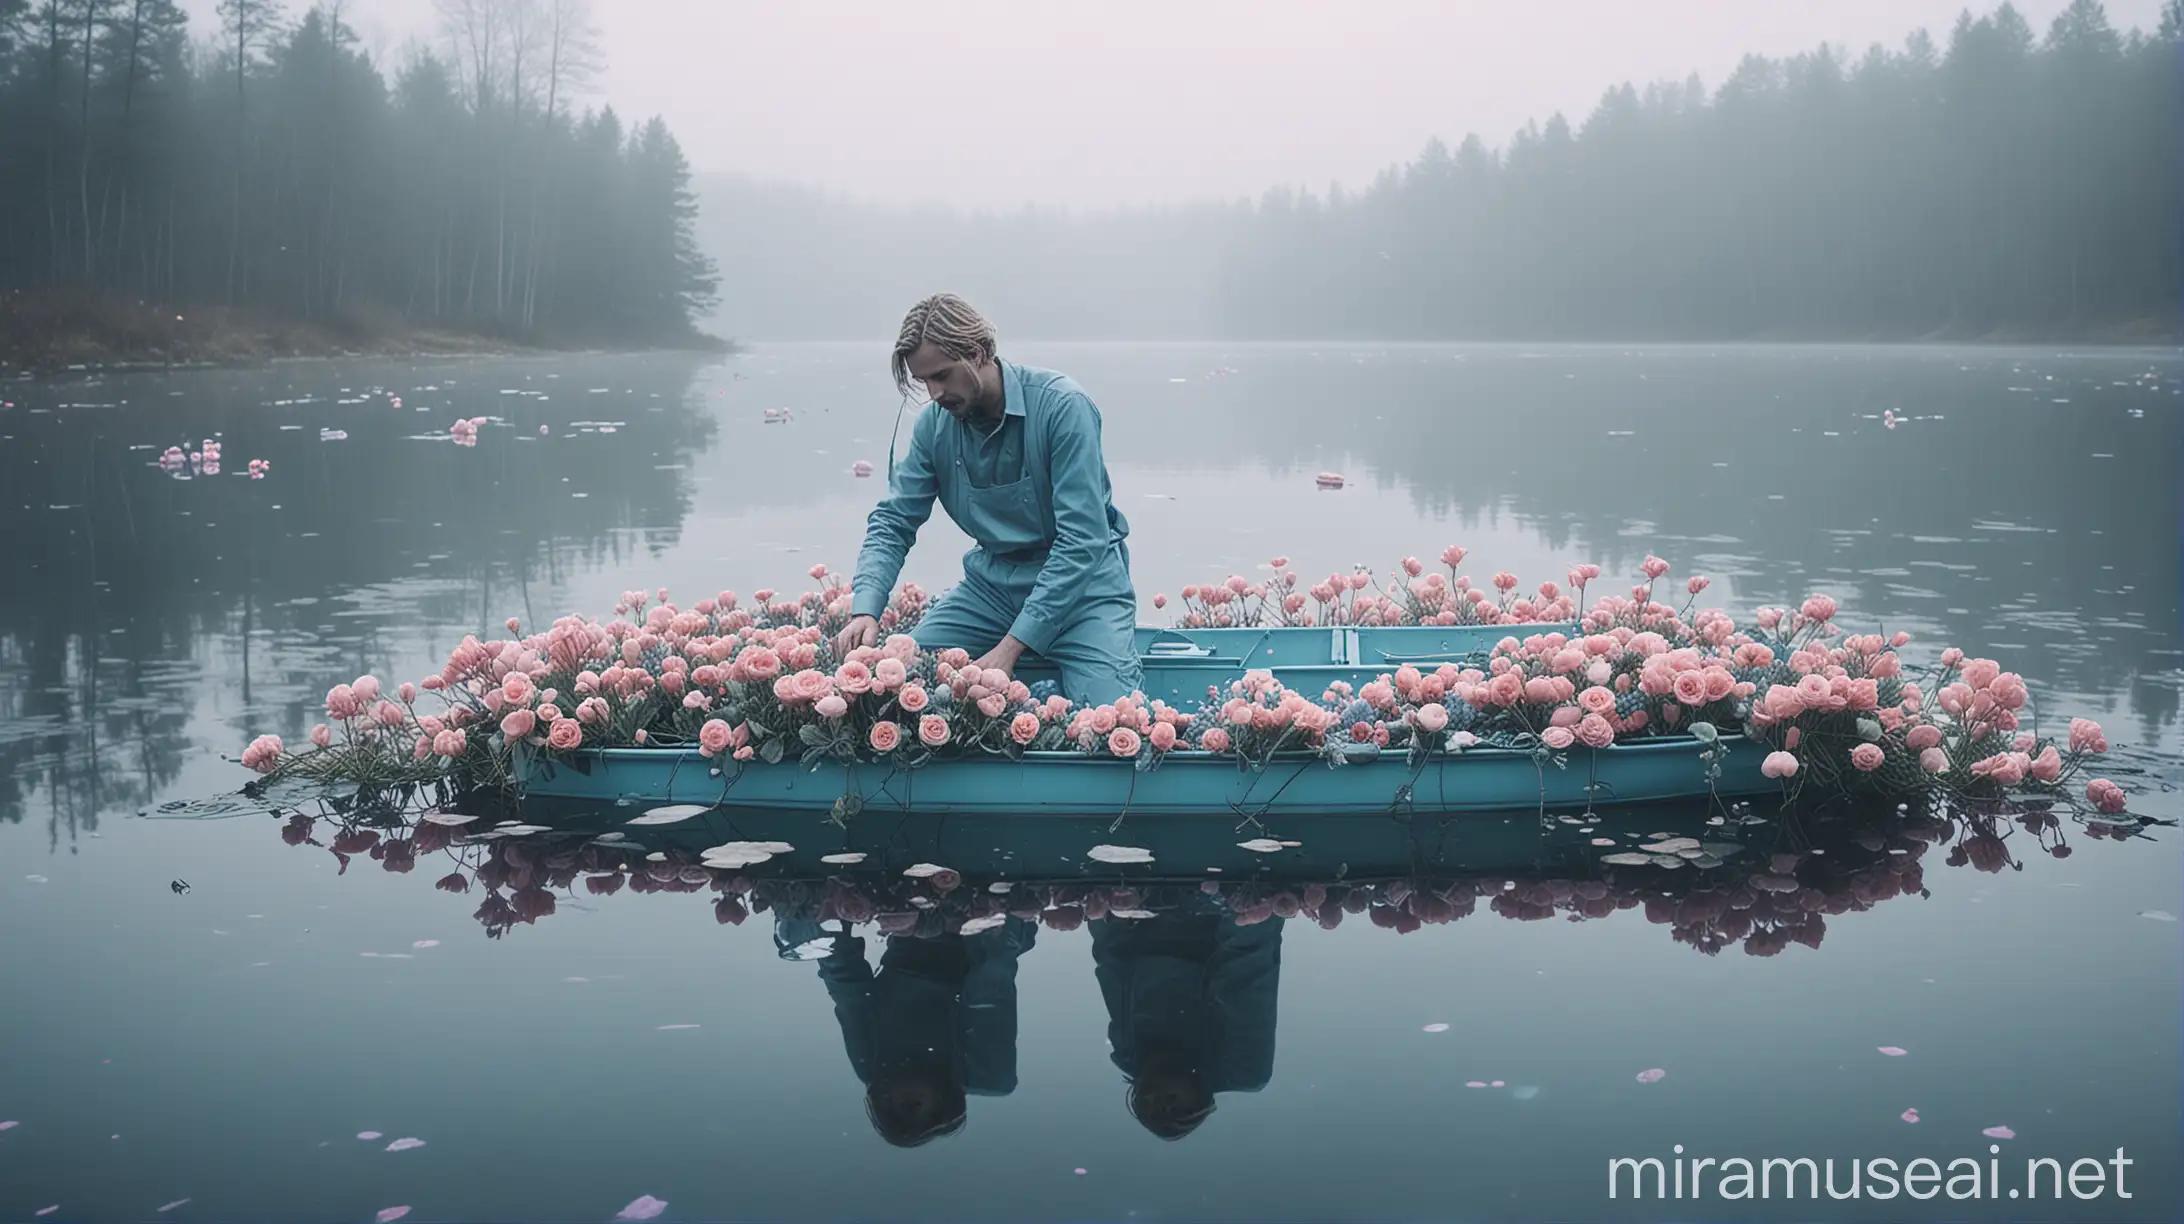 surreal and dreamlike, a trapped journalist celebrate the demise of a florist on a lake, cold blue neon color scheme, scandinavian vibe, diffused pale light, saturated, pastel, dreamy atmosphere, liquid psychedelic